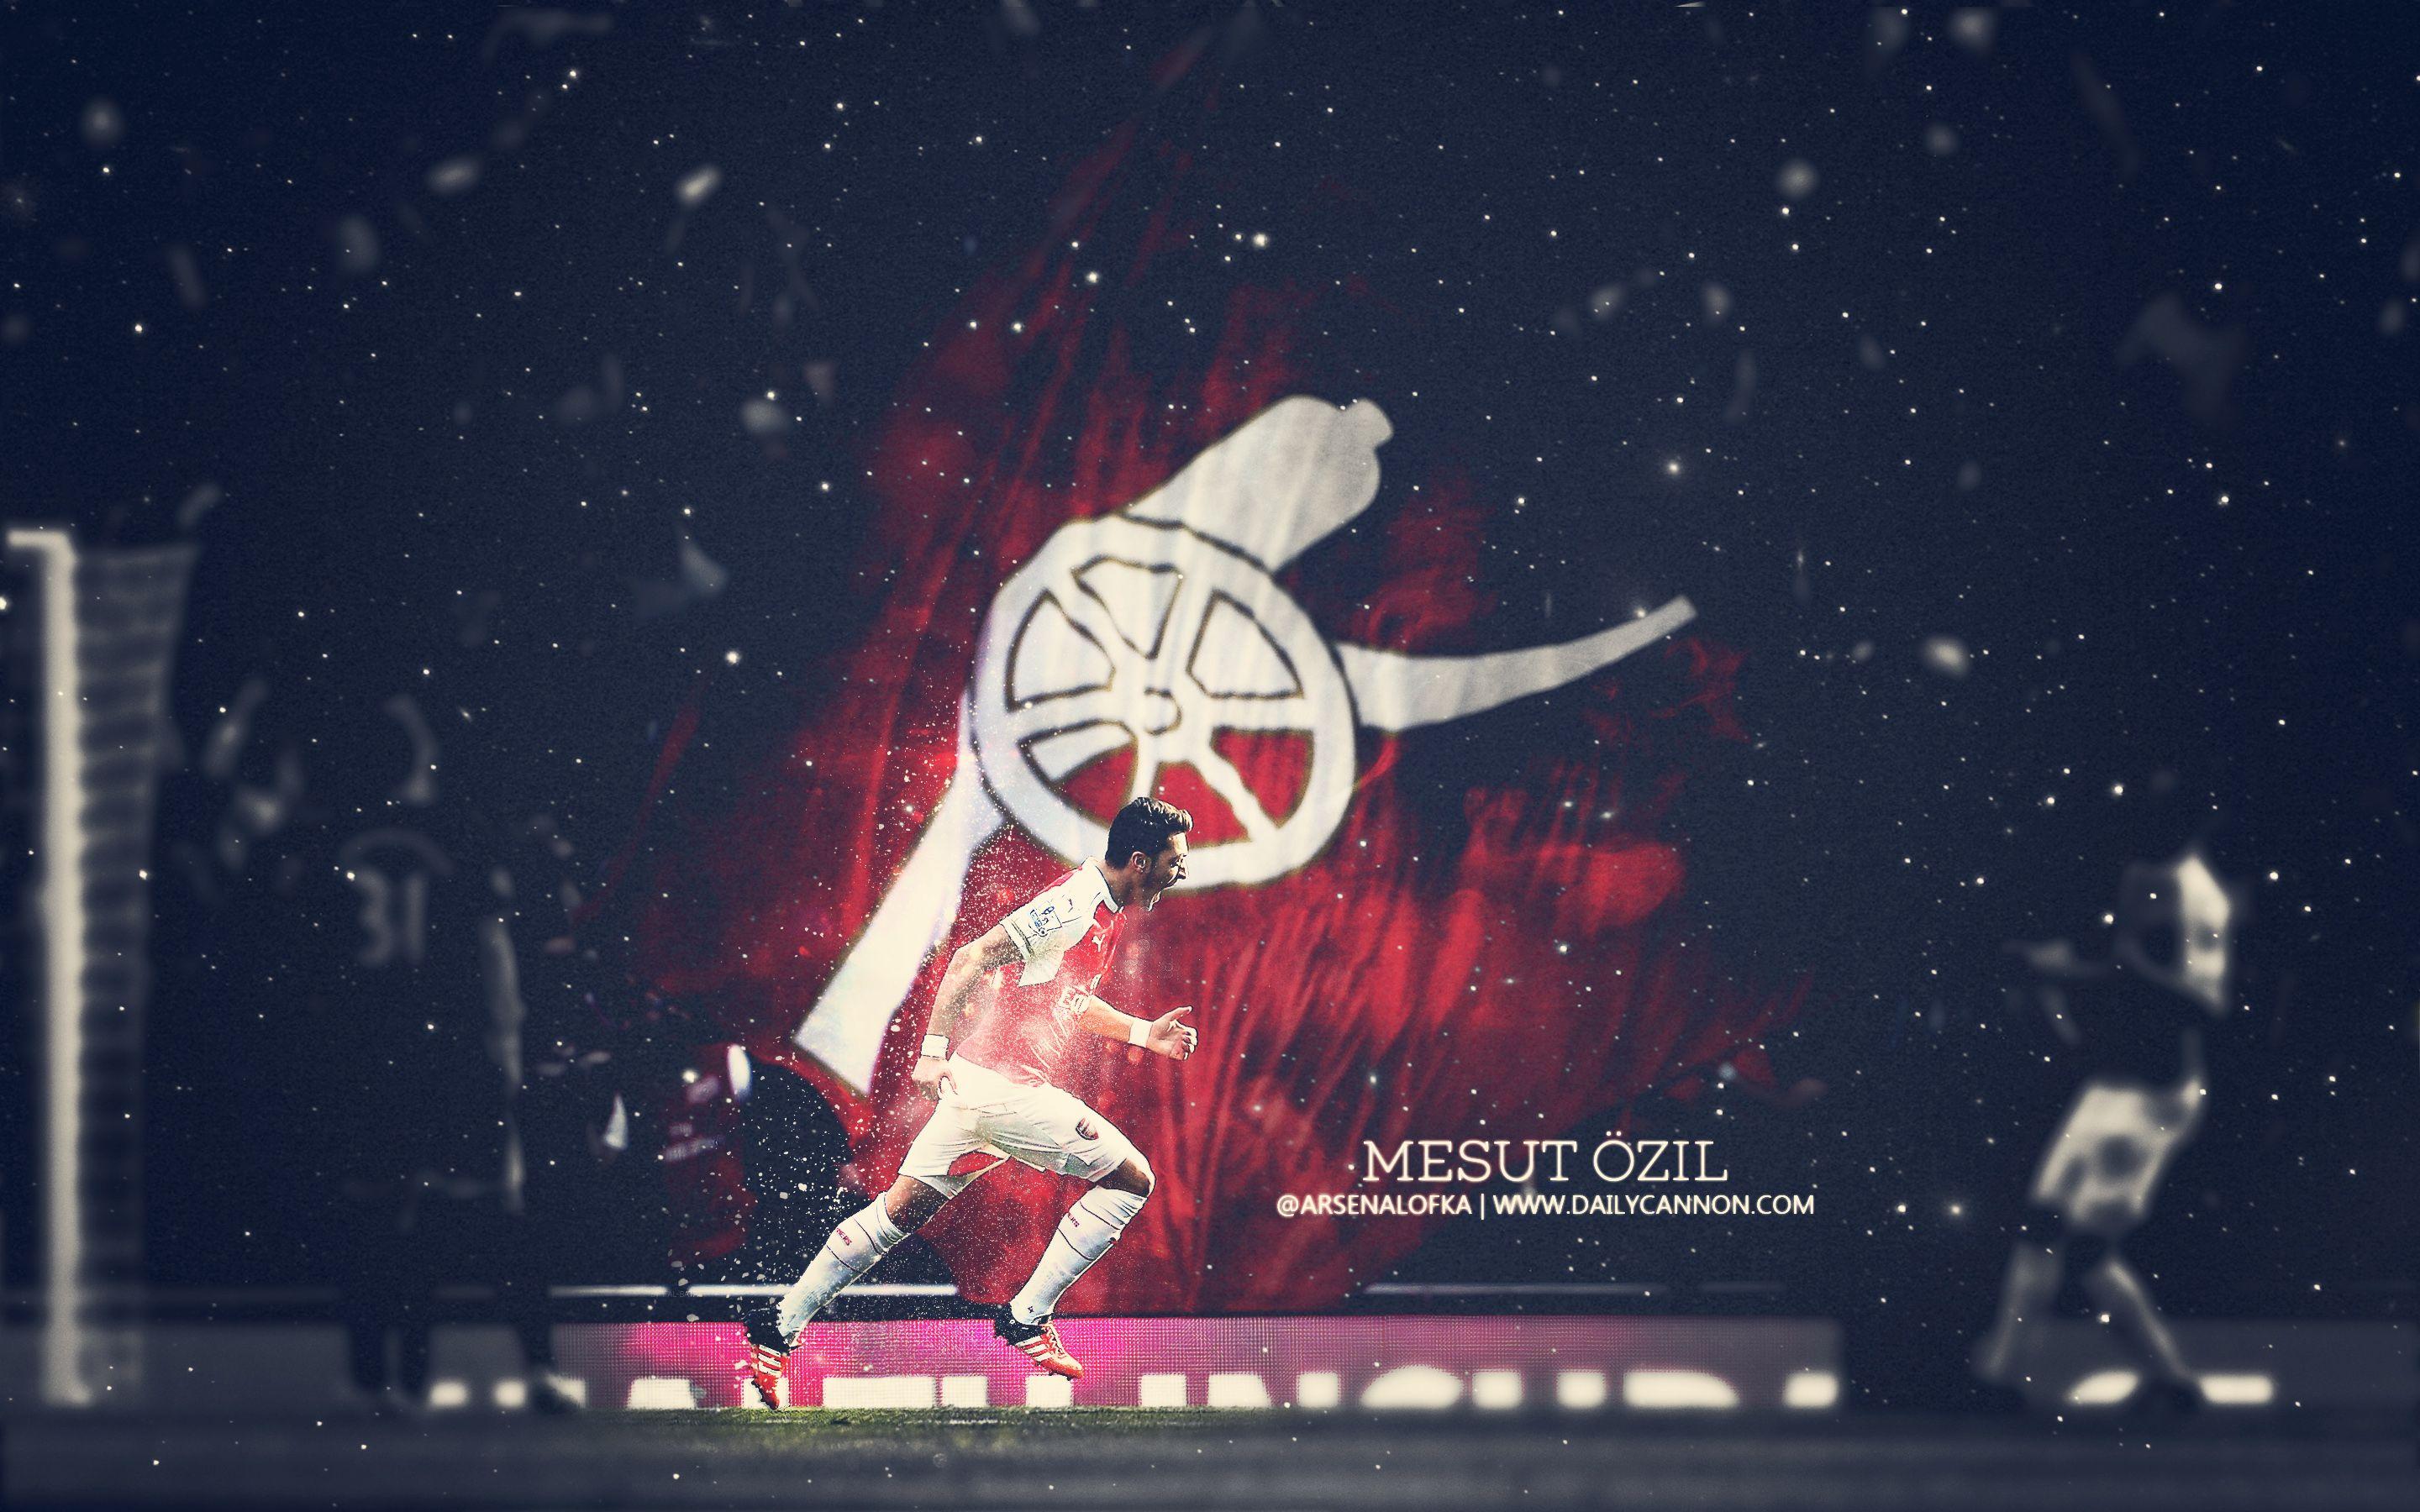 Mesut Özil Vs Manchester United wallpaper and covers